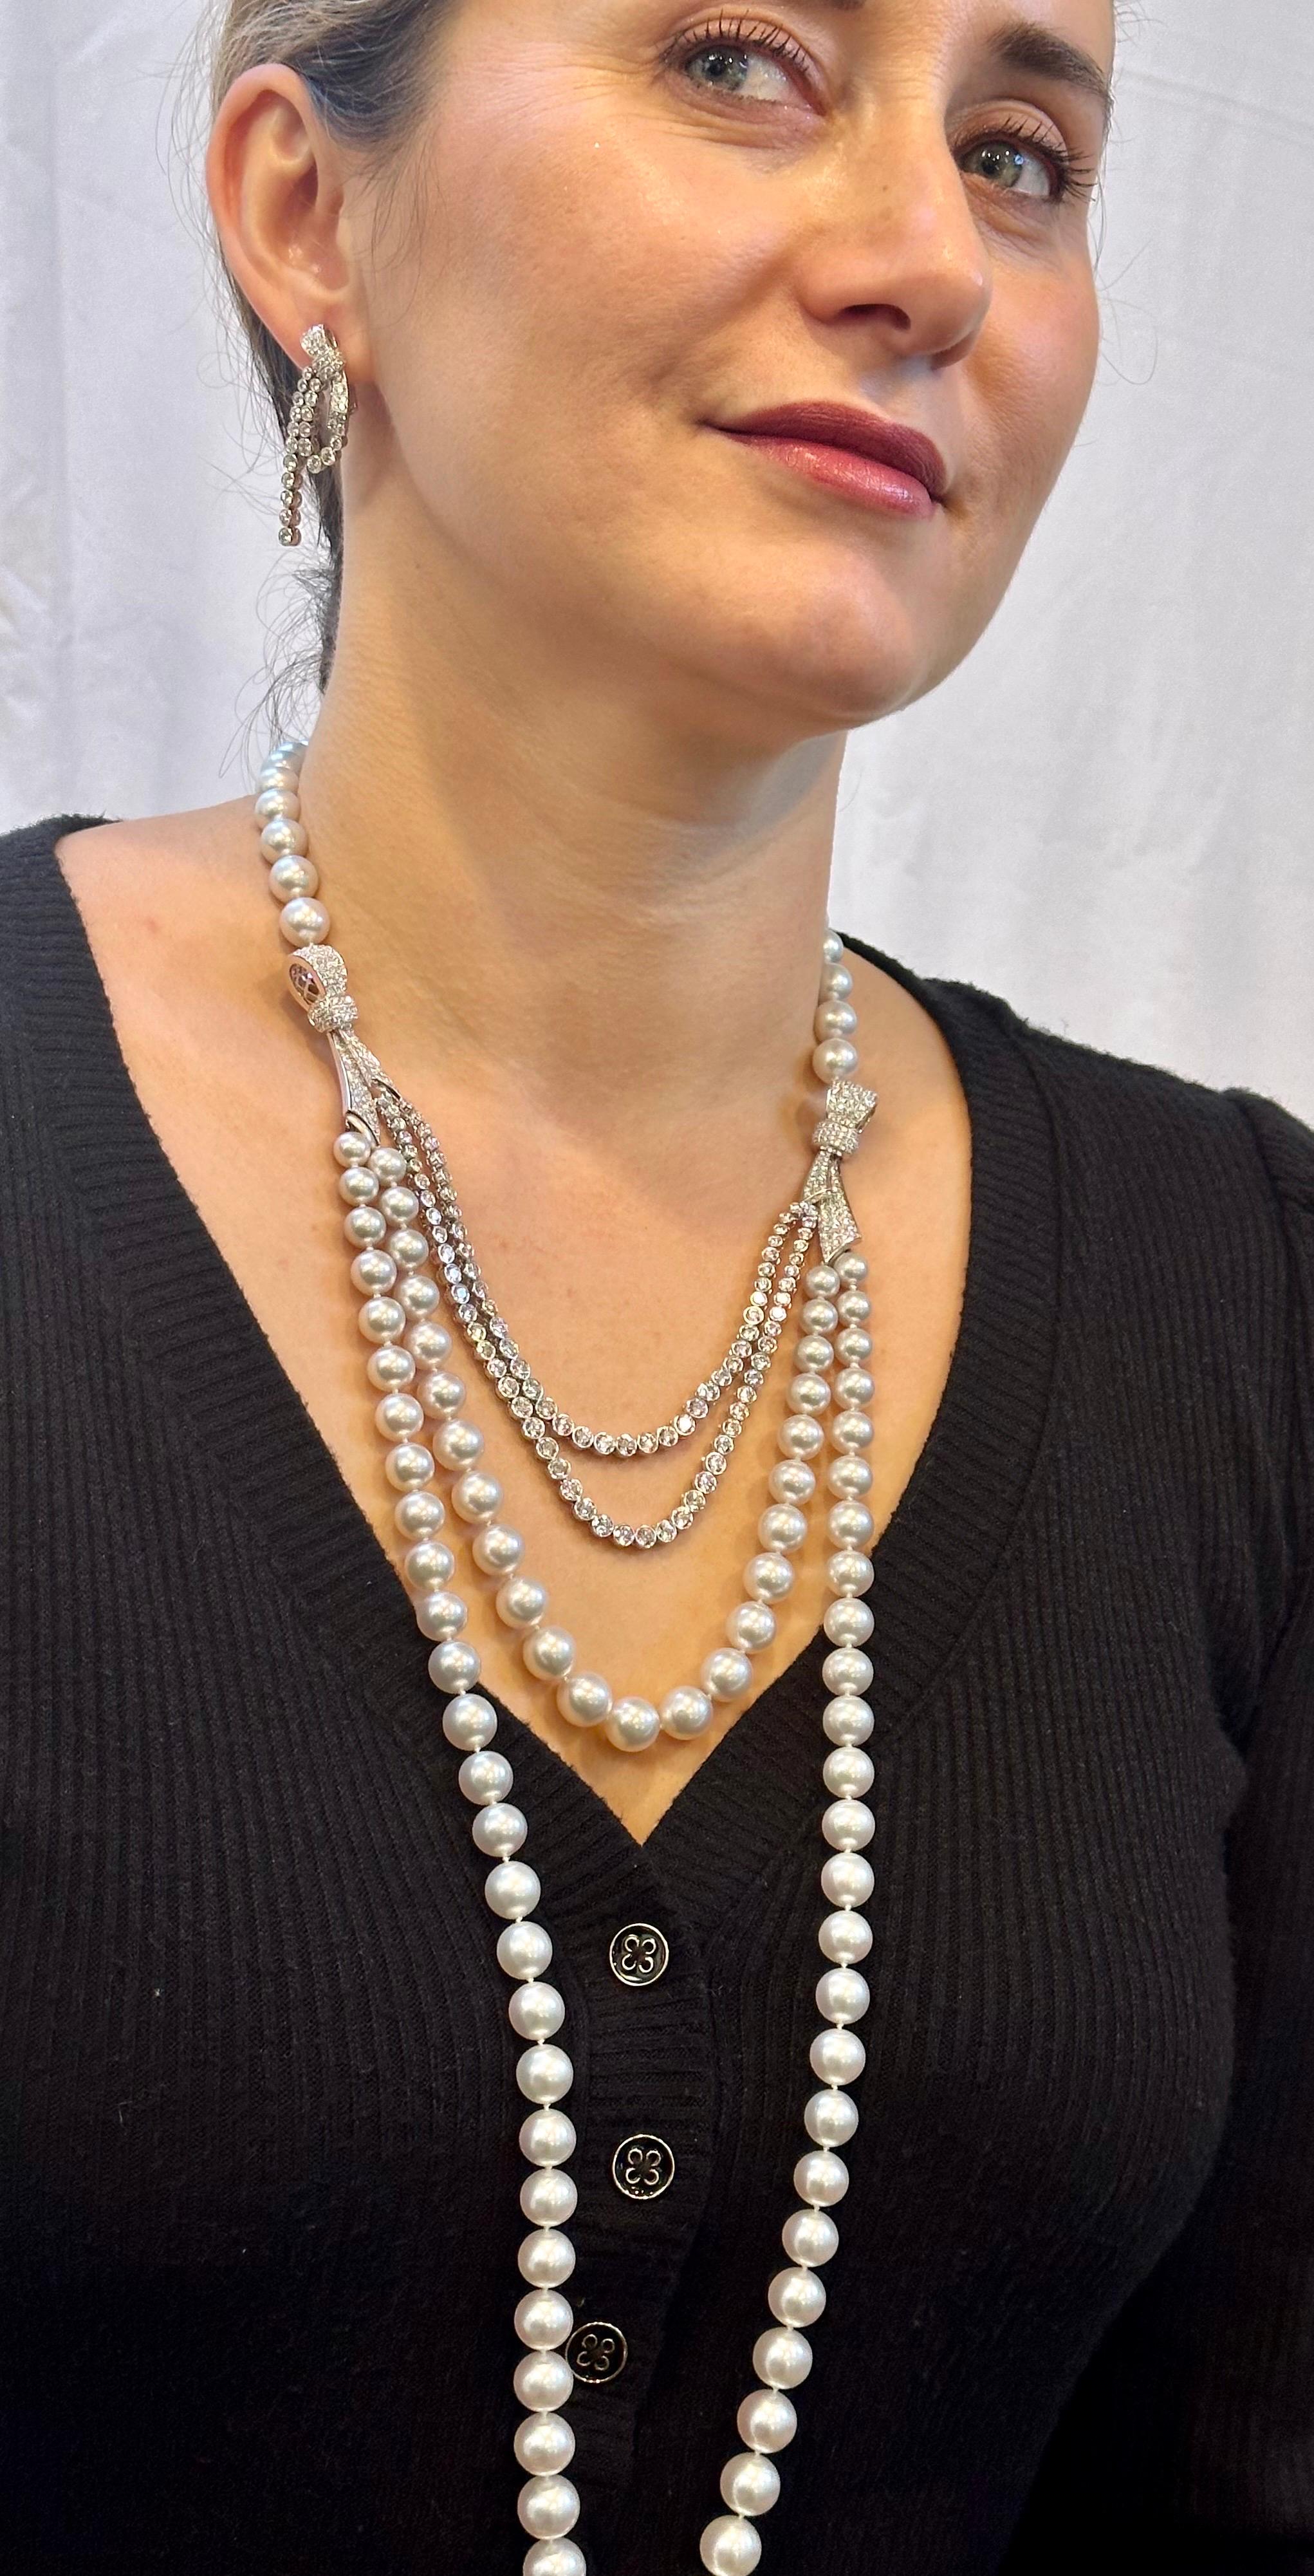 Piaget Paris Diamond & South Sea Pearl Suite Necklace, Earring Watch & Ring 18K For Sale 9